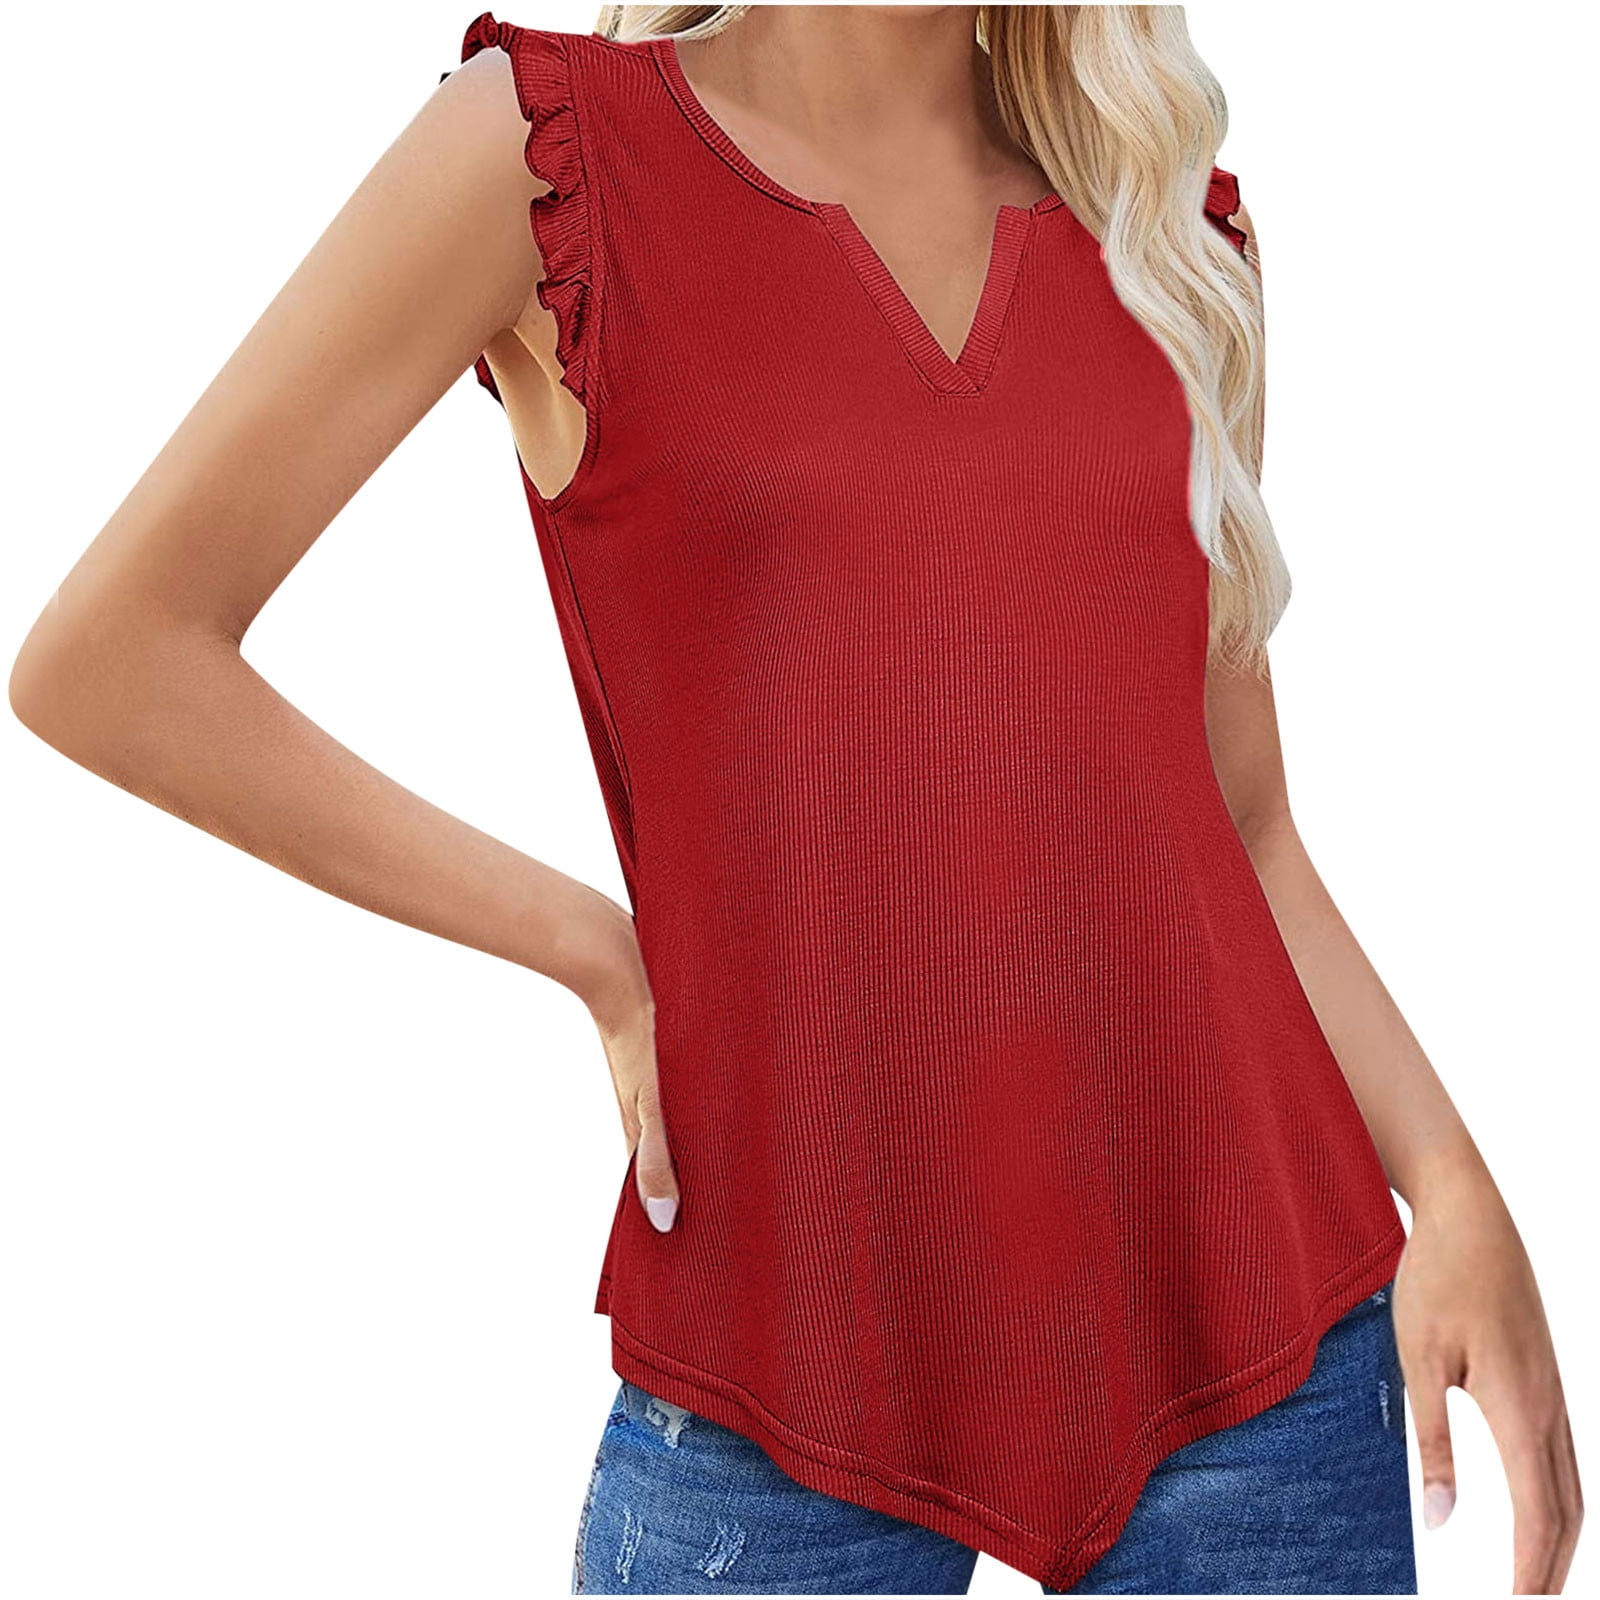 YWDJ Tank for Women Trendy Fashion V-Neck Casual Solid Tank Tops Blouse Red - Walmart.com